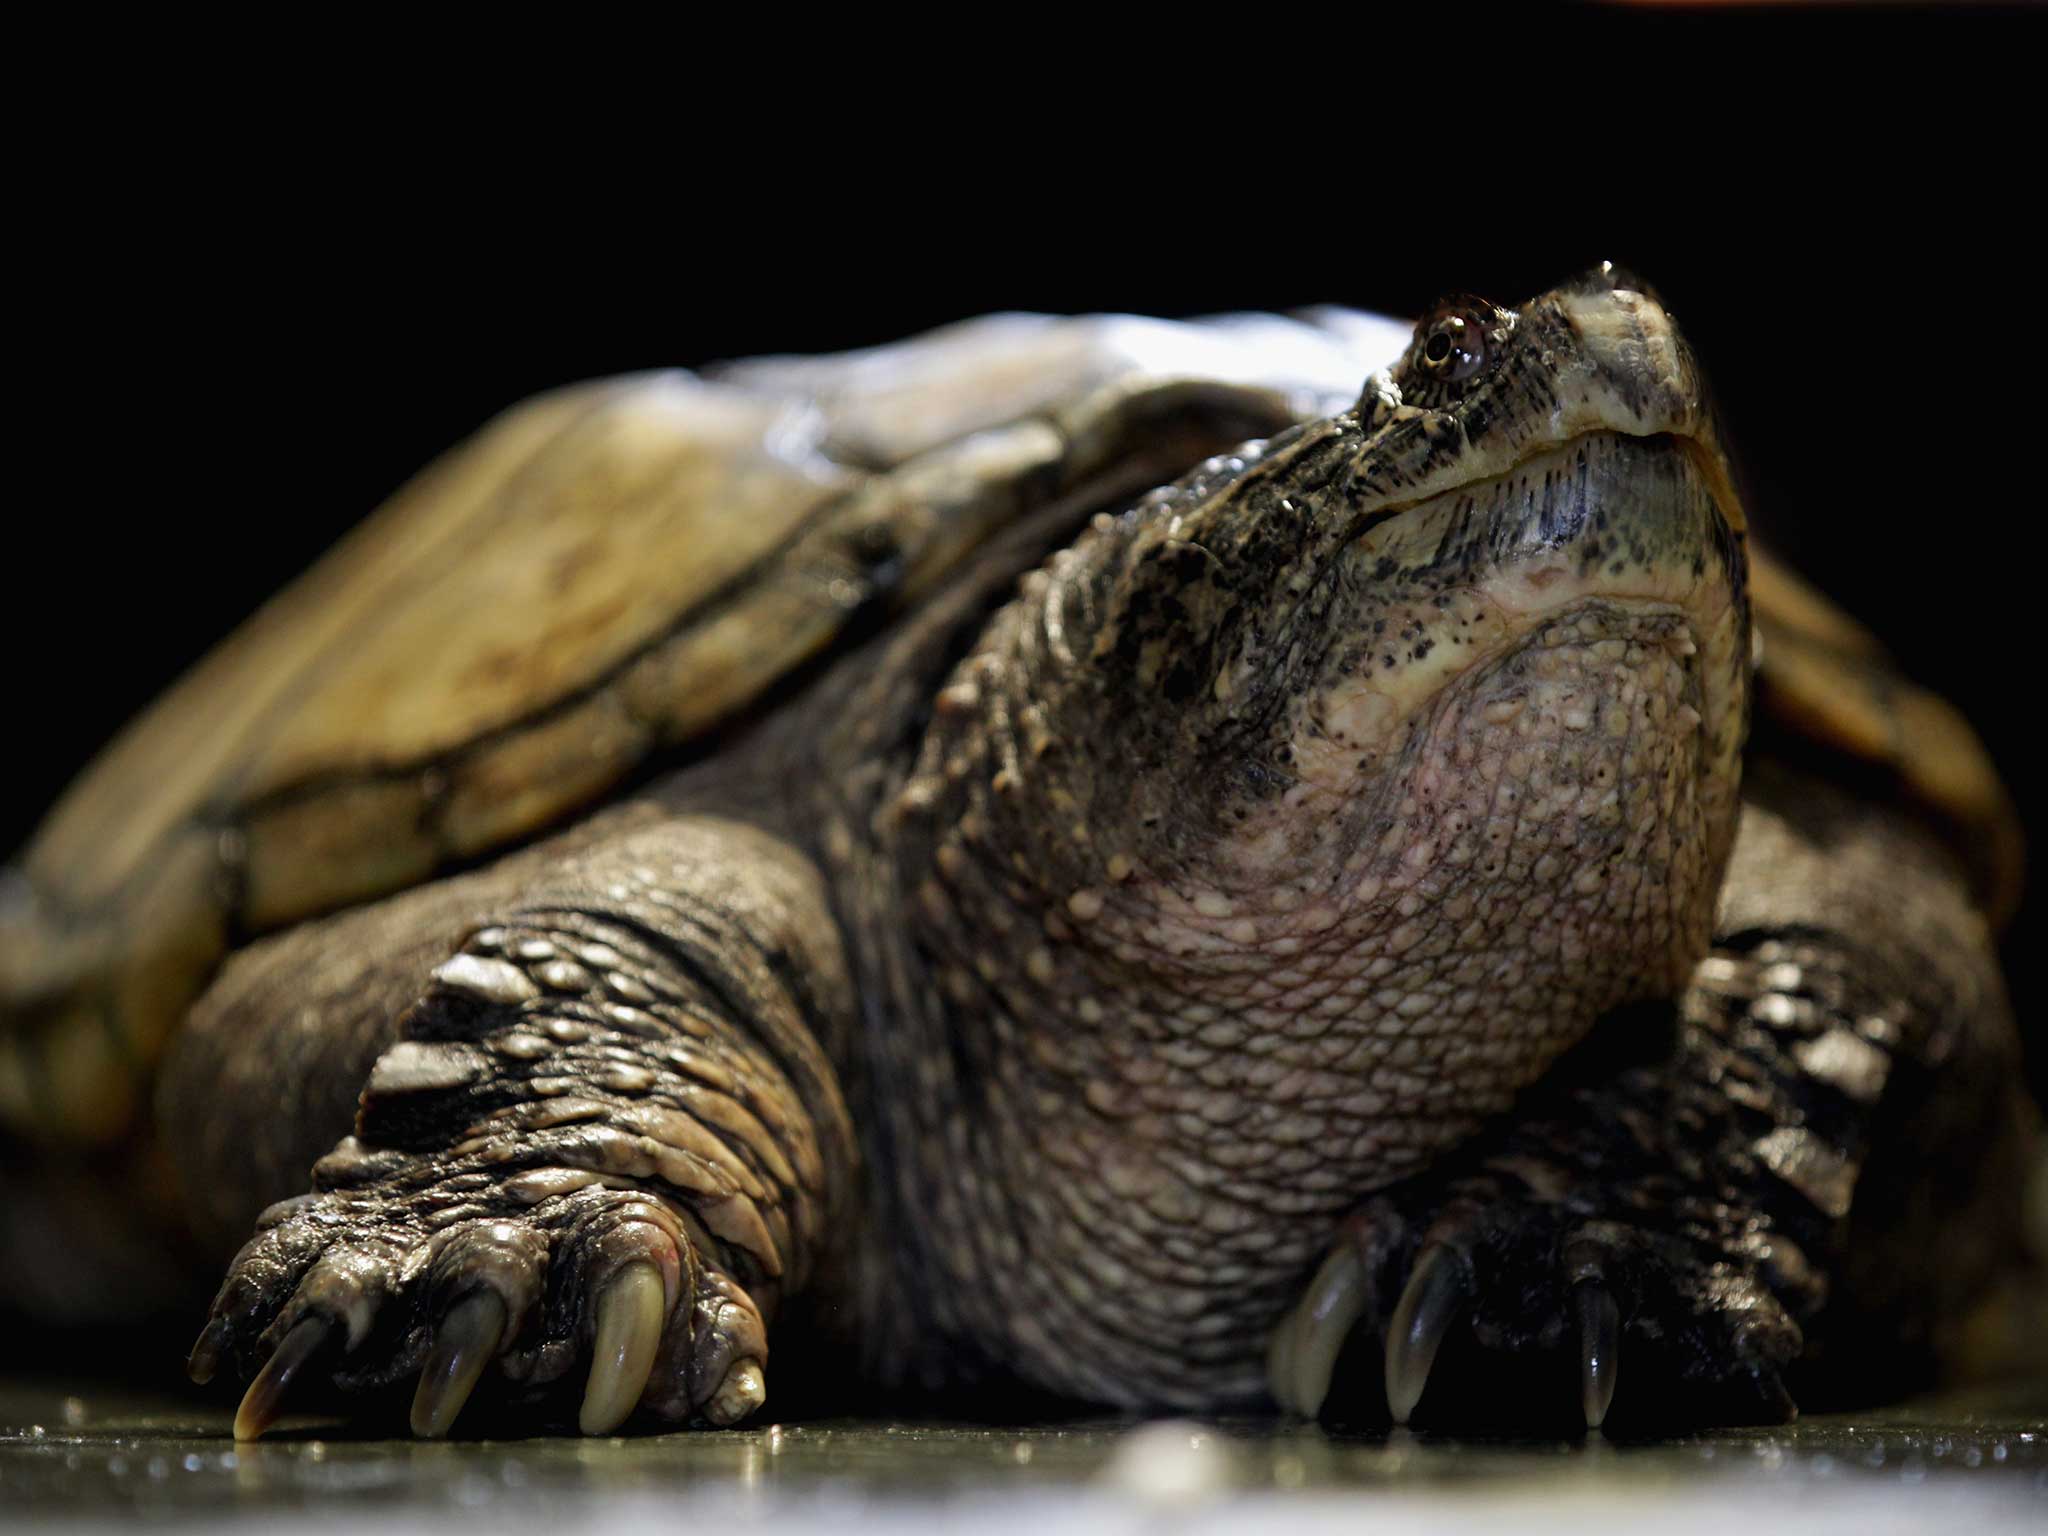 Could the snapping turtle become endangered?